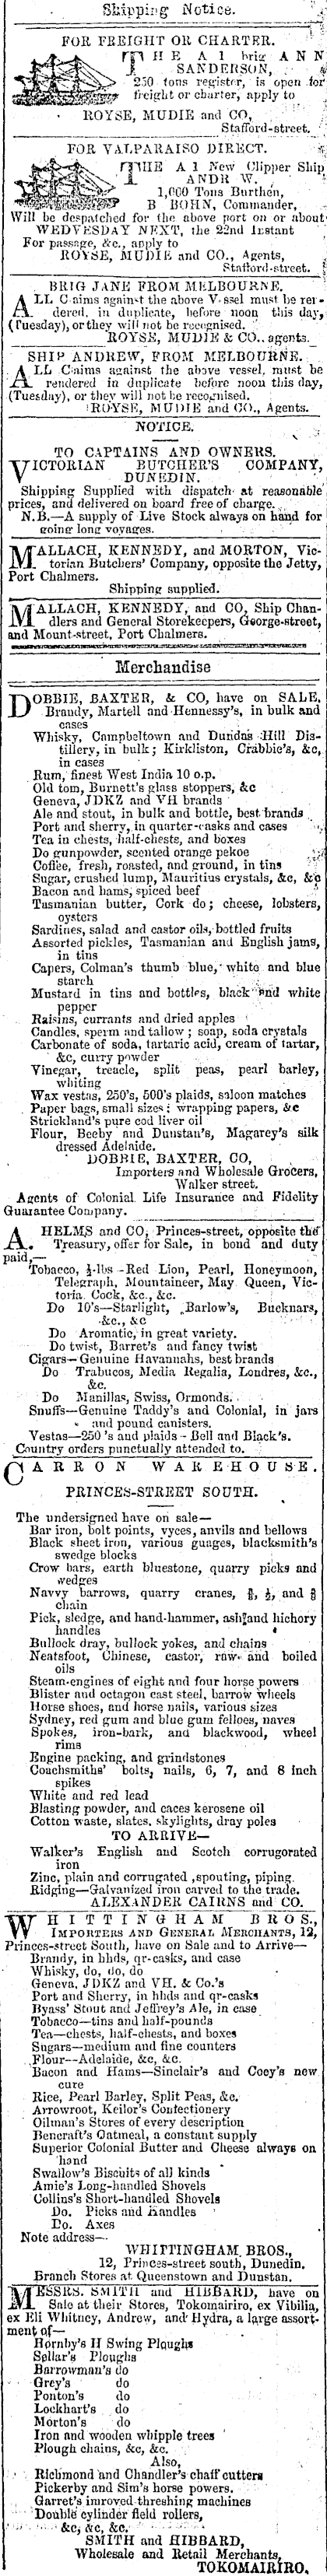 Papers Past Newspapers Otago Daily Times 21 April 1863 Page 1 Advertisements Column 3